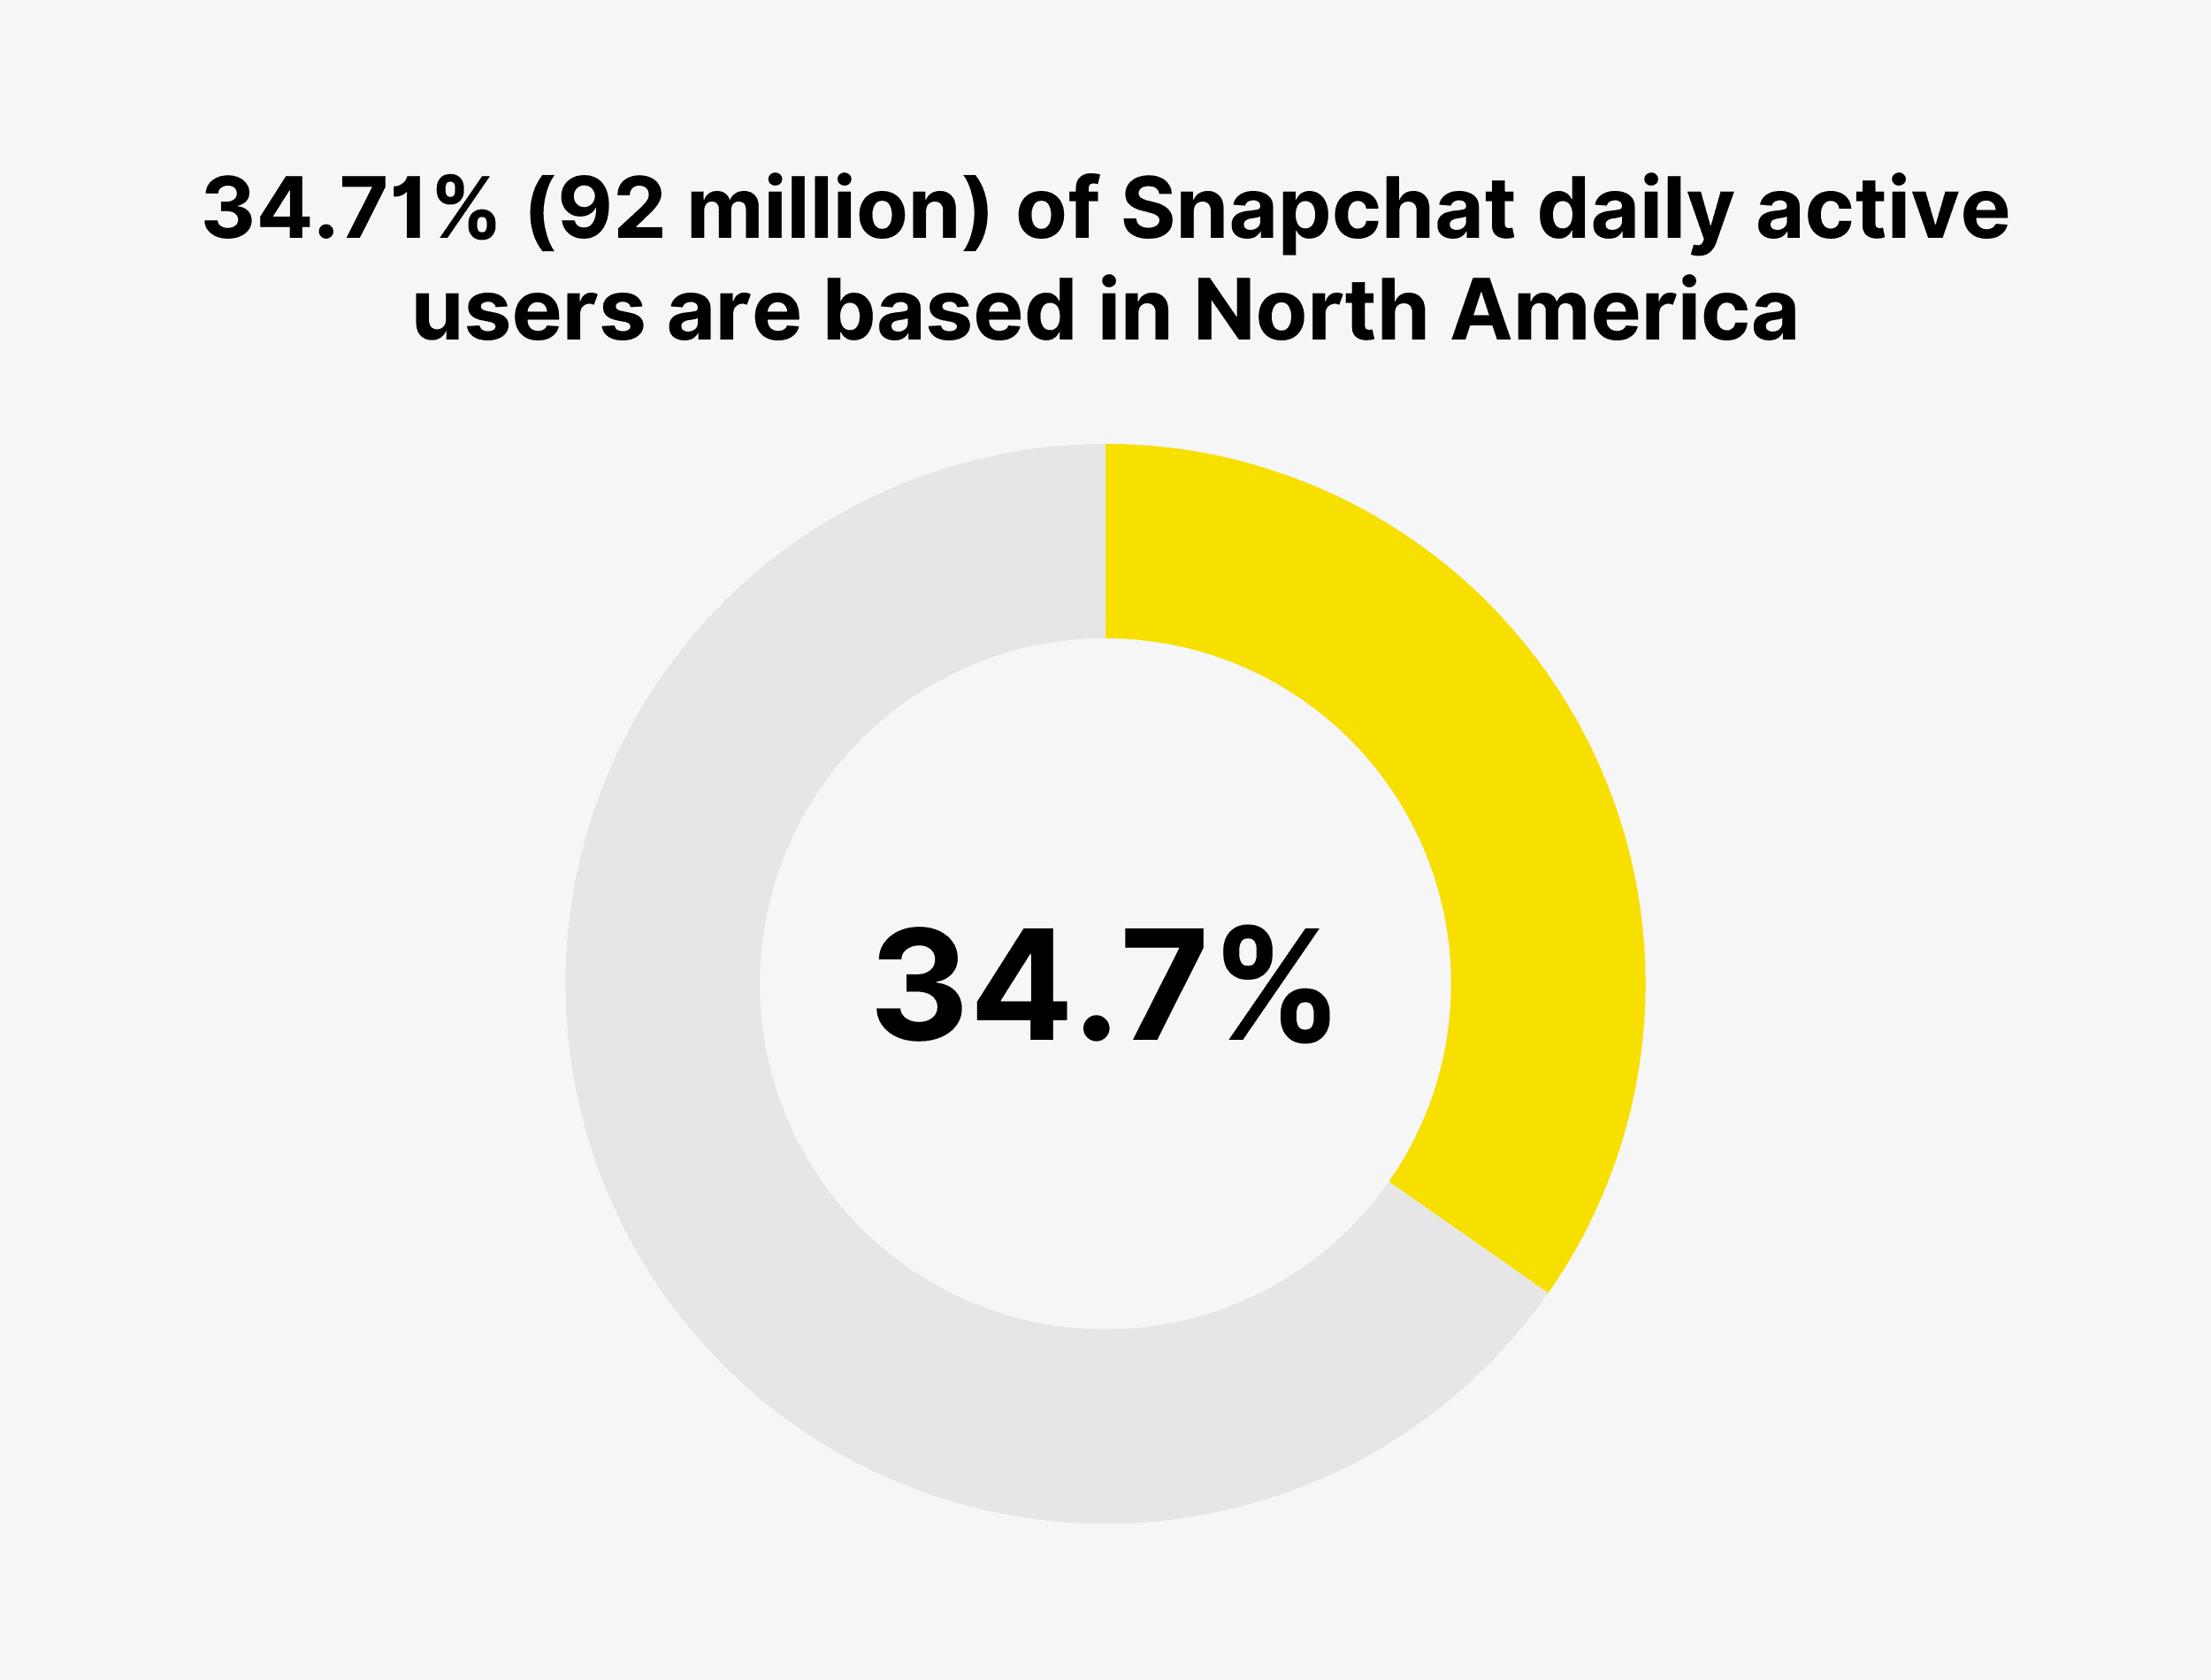 34.71% (92 million) of Snapchat daily active users are based in North America